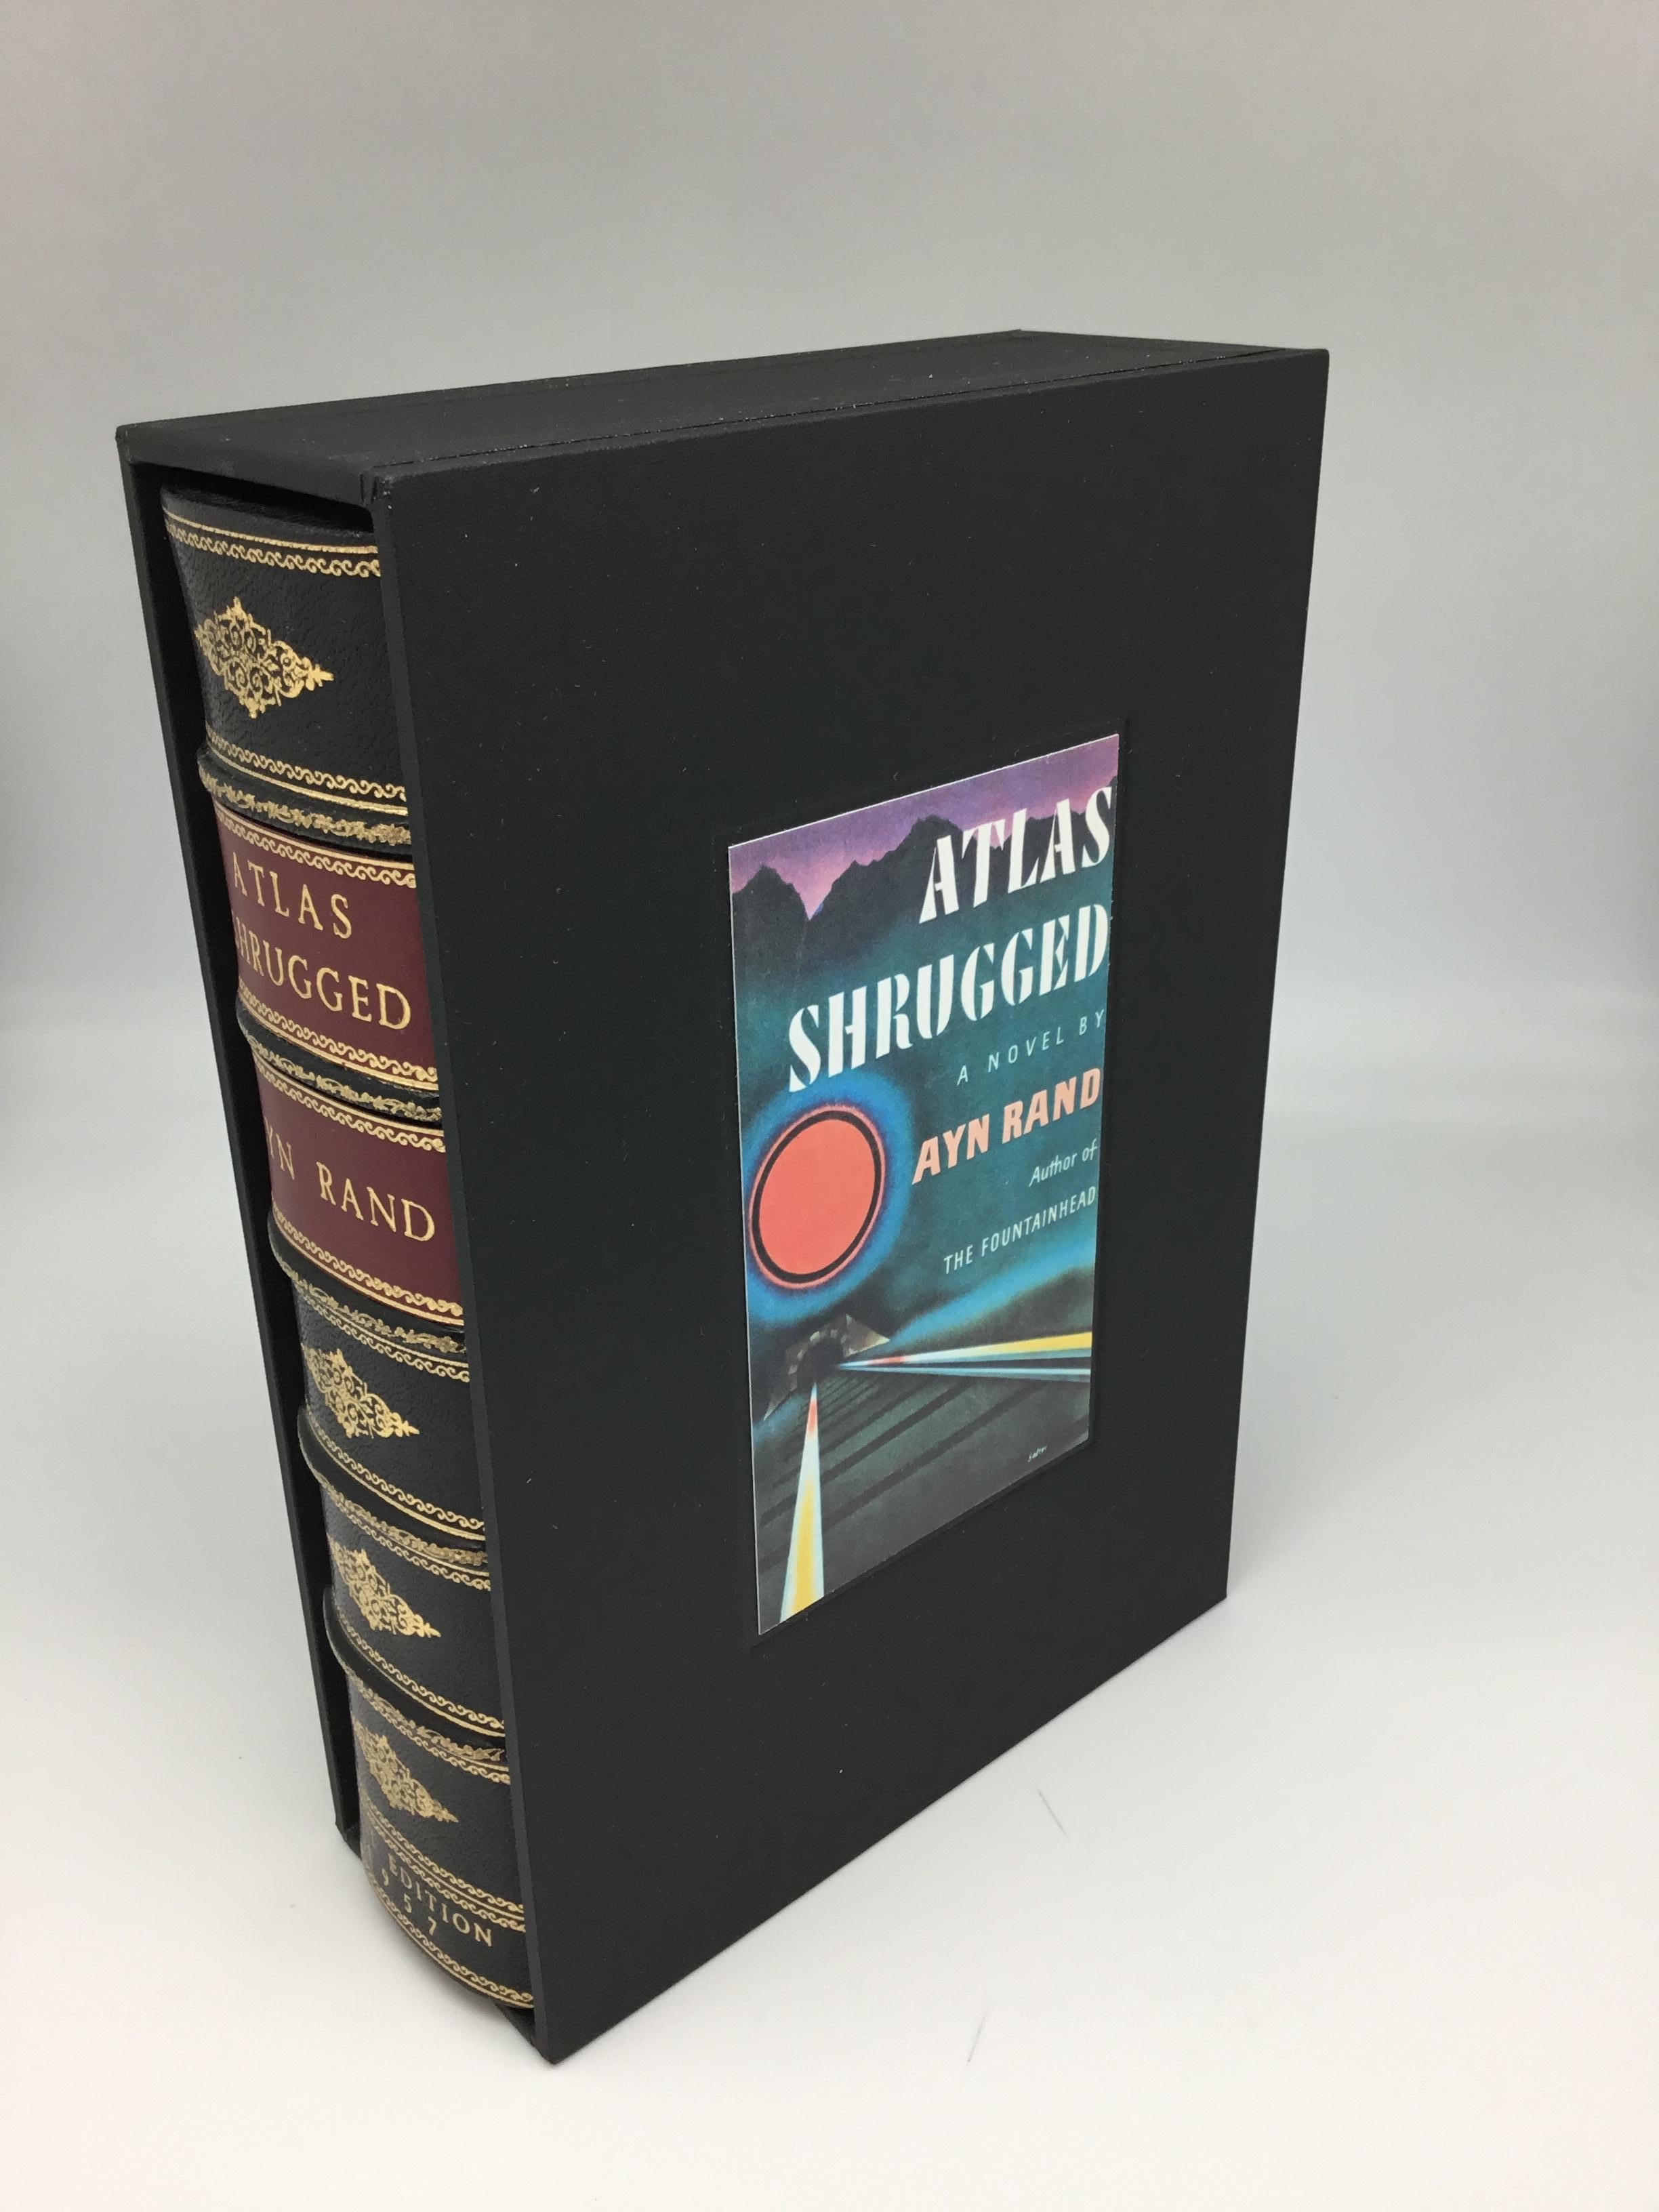 This is the first edition, first impression, of one of literature’s most popular and influential novels of the 20th century. A high spot in 20th century literature, Atlas Shrugged is Ayn Rand's fourth and final novel, based on her principles of